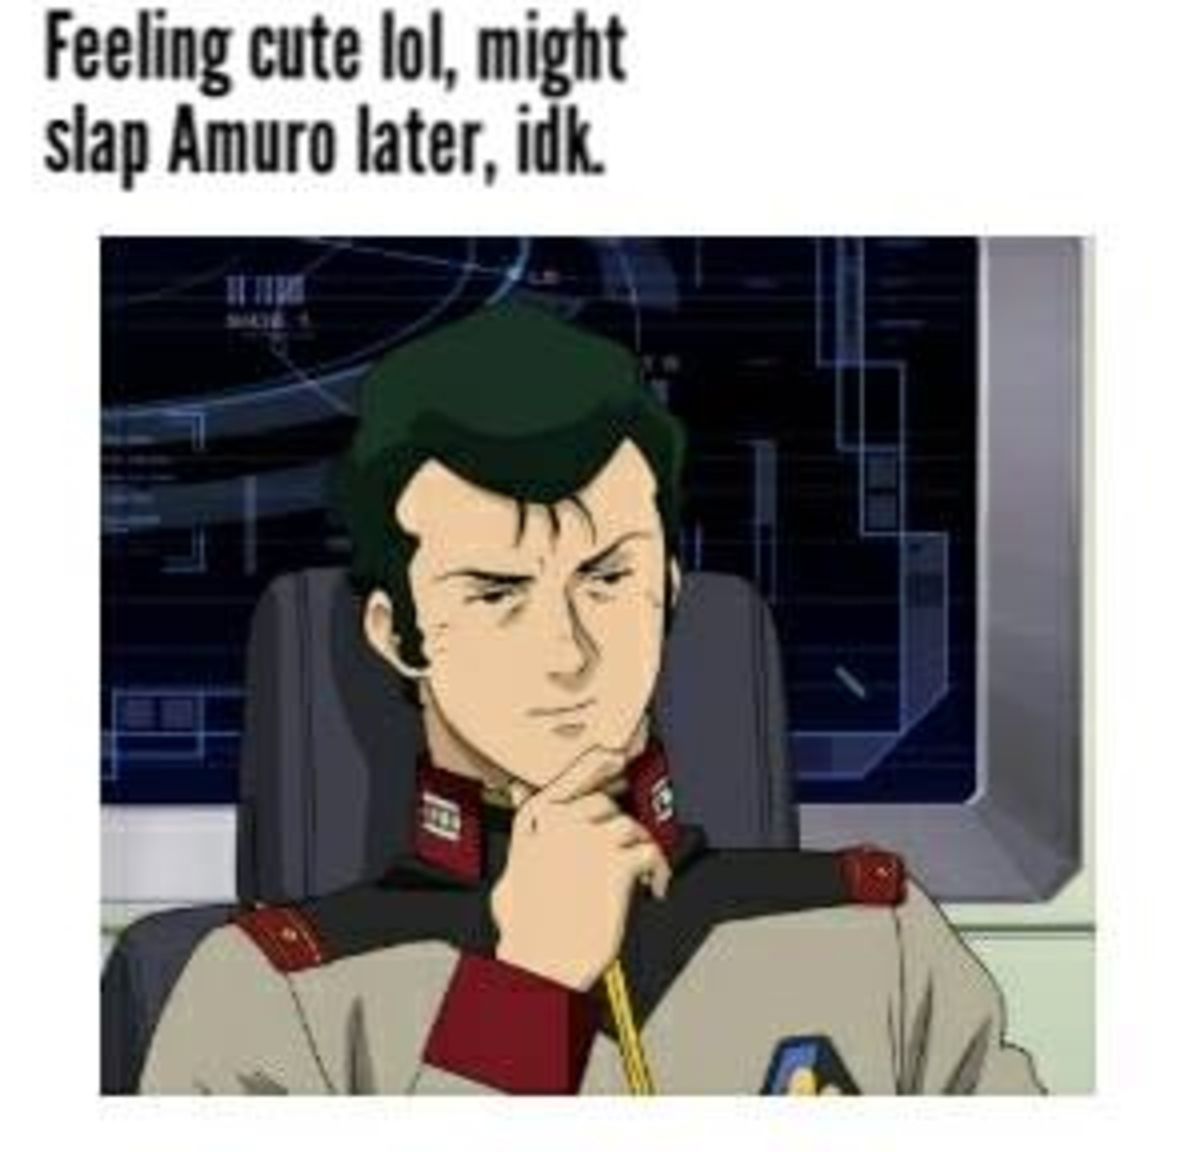 Mobile Suit Gundam 10 Hilarious Memes That Only Real Fans Will Appreciate